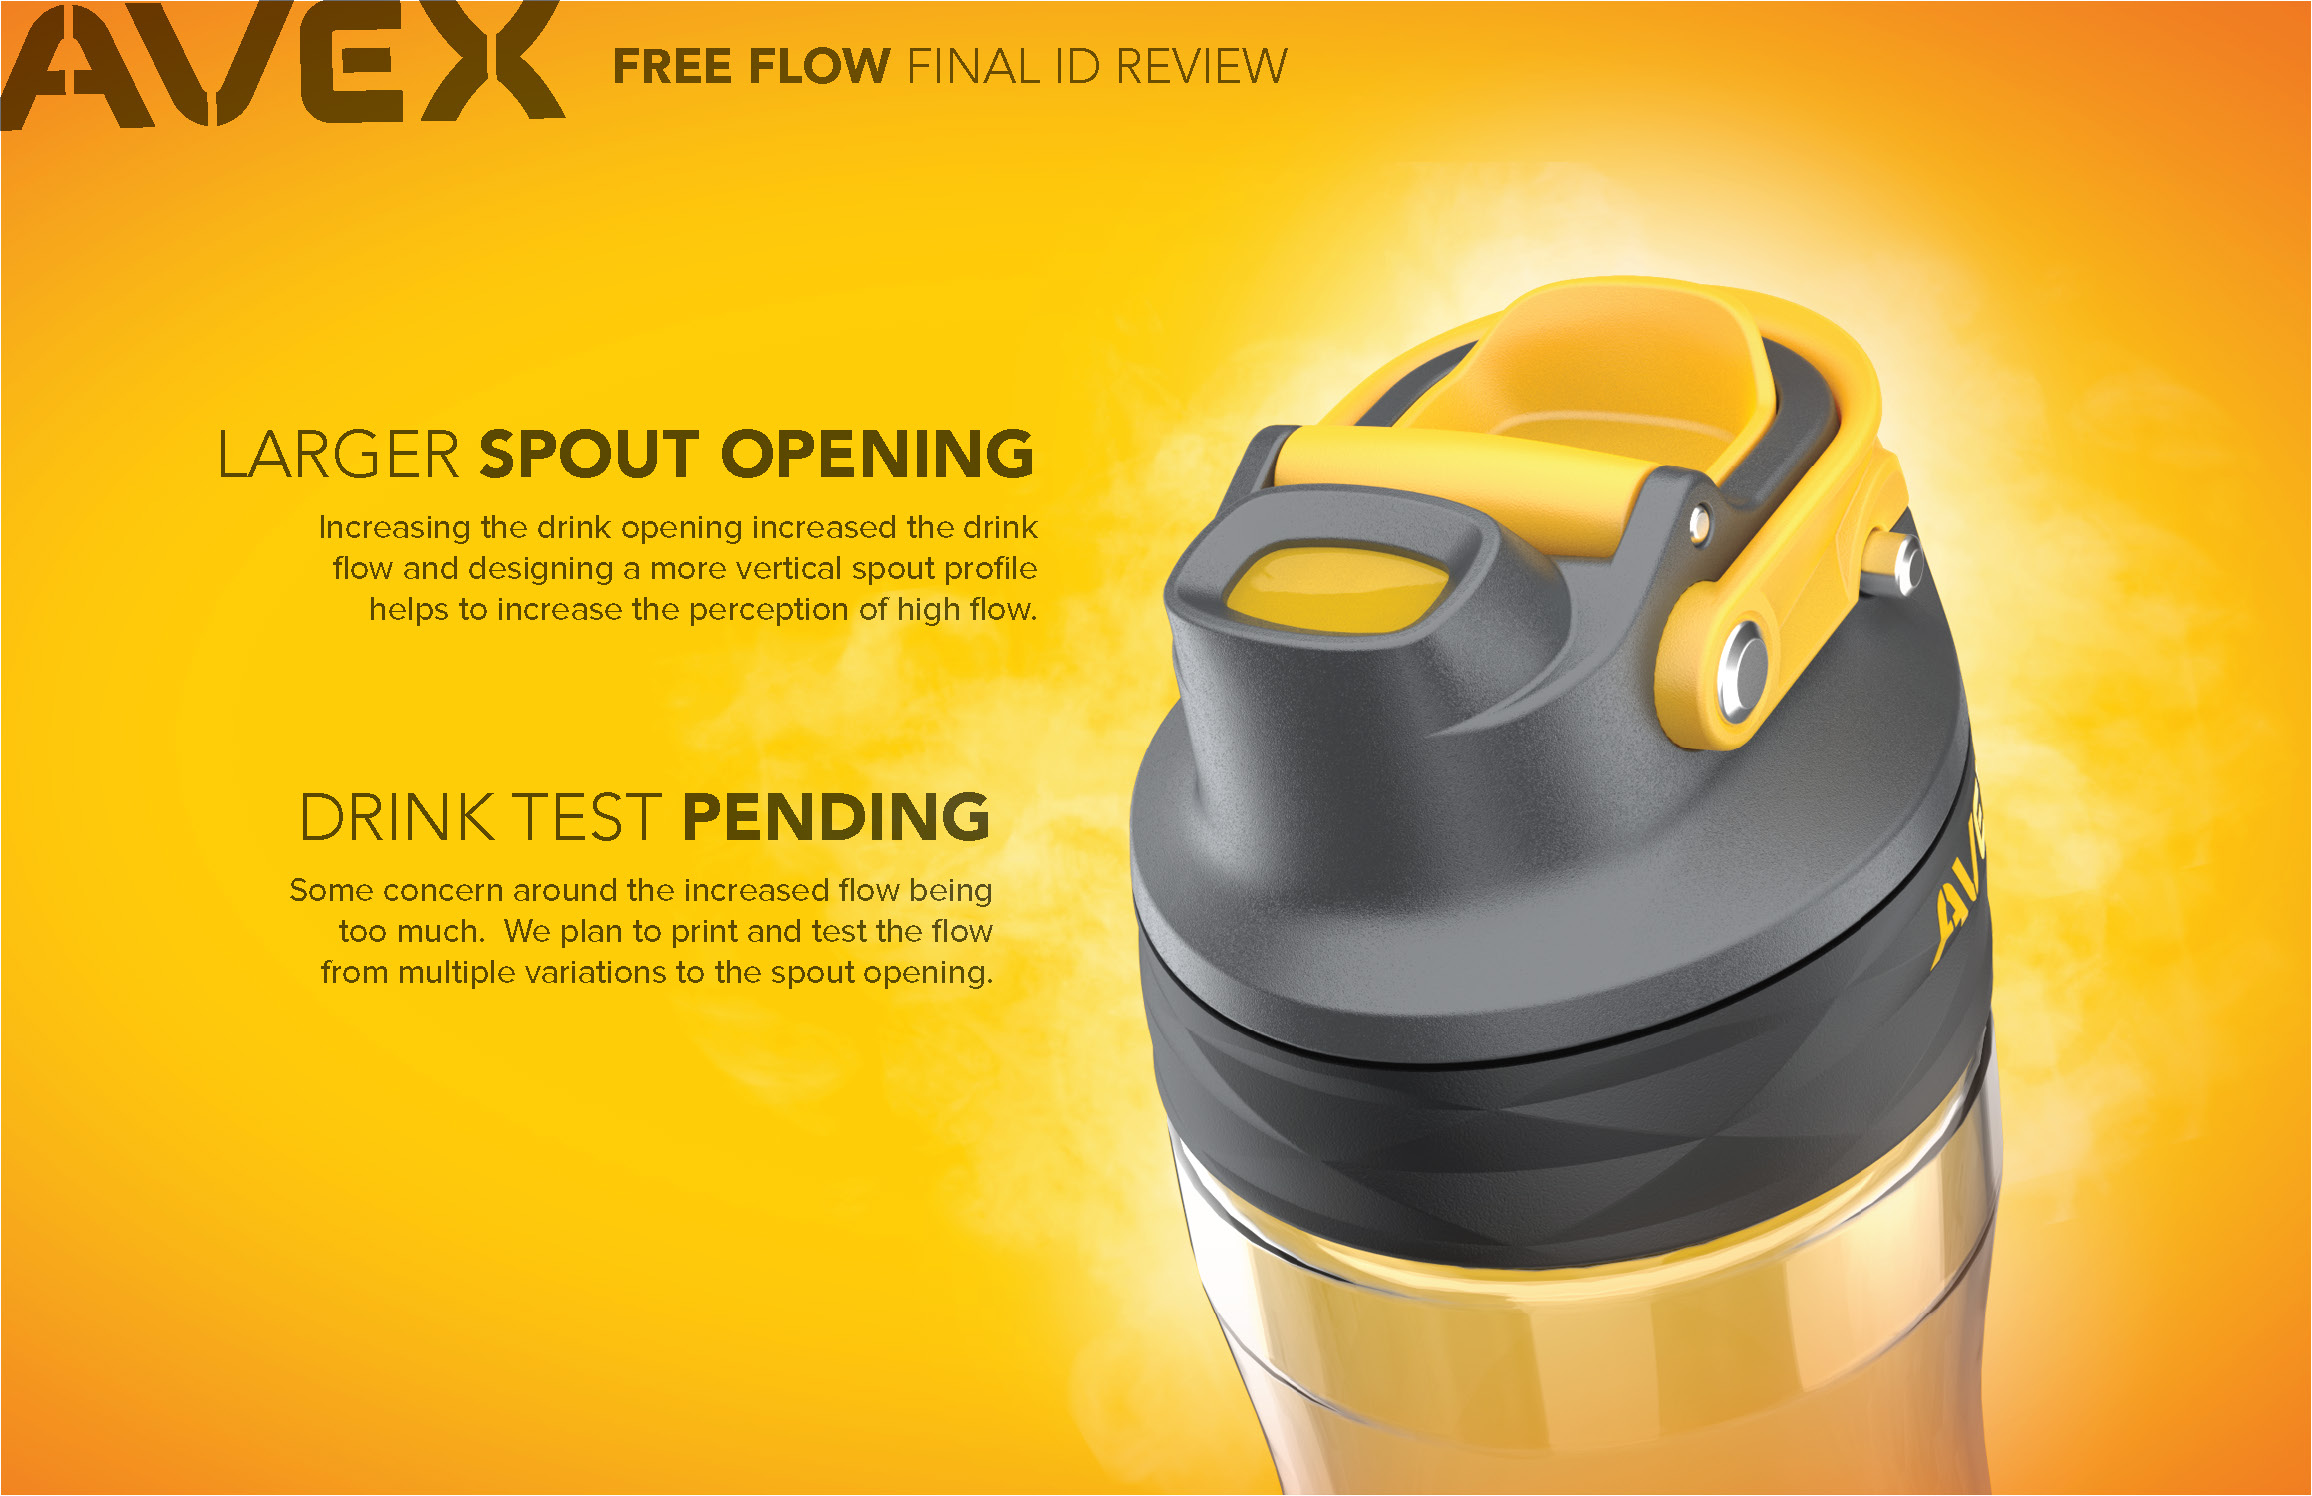 AVEX FreeFlow and ReCharge thermal bottle review - The Gadgeteer